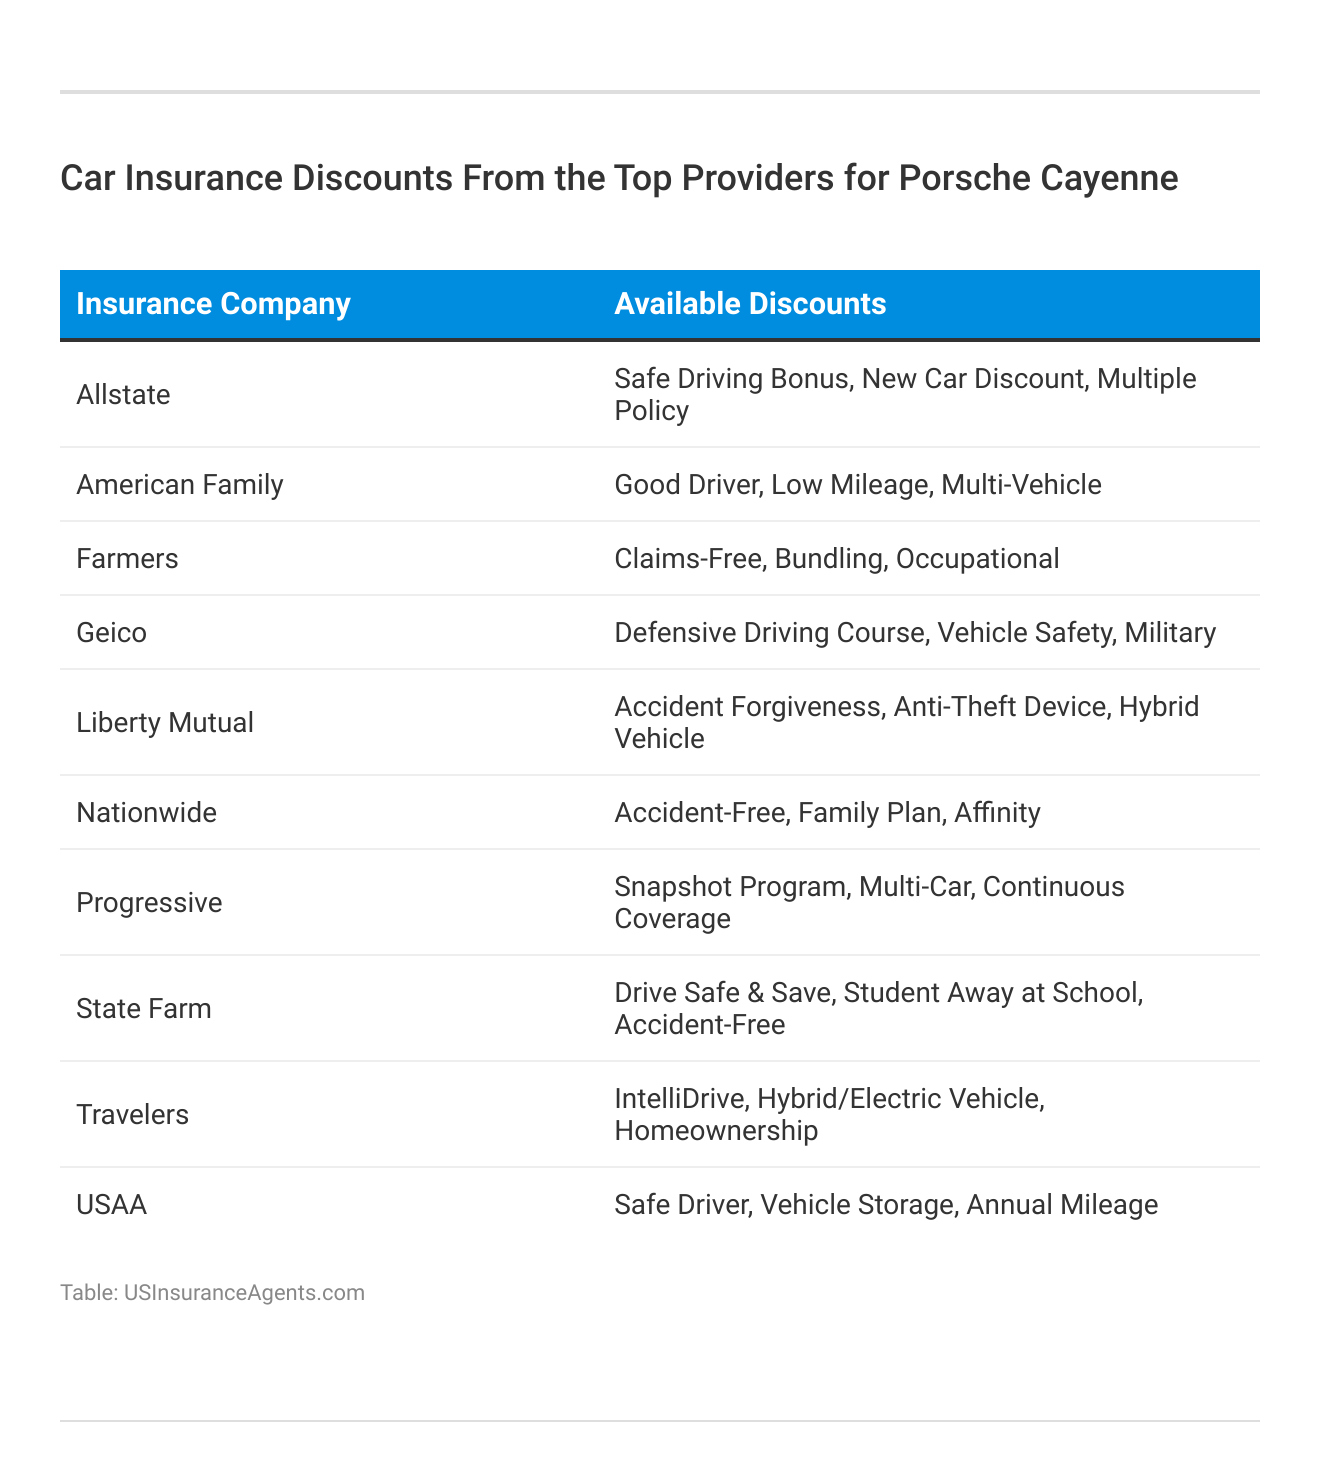 <h3>Car Insurance Discounts From the Top Providers for Porsche Cayenne</h3>